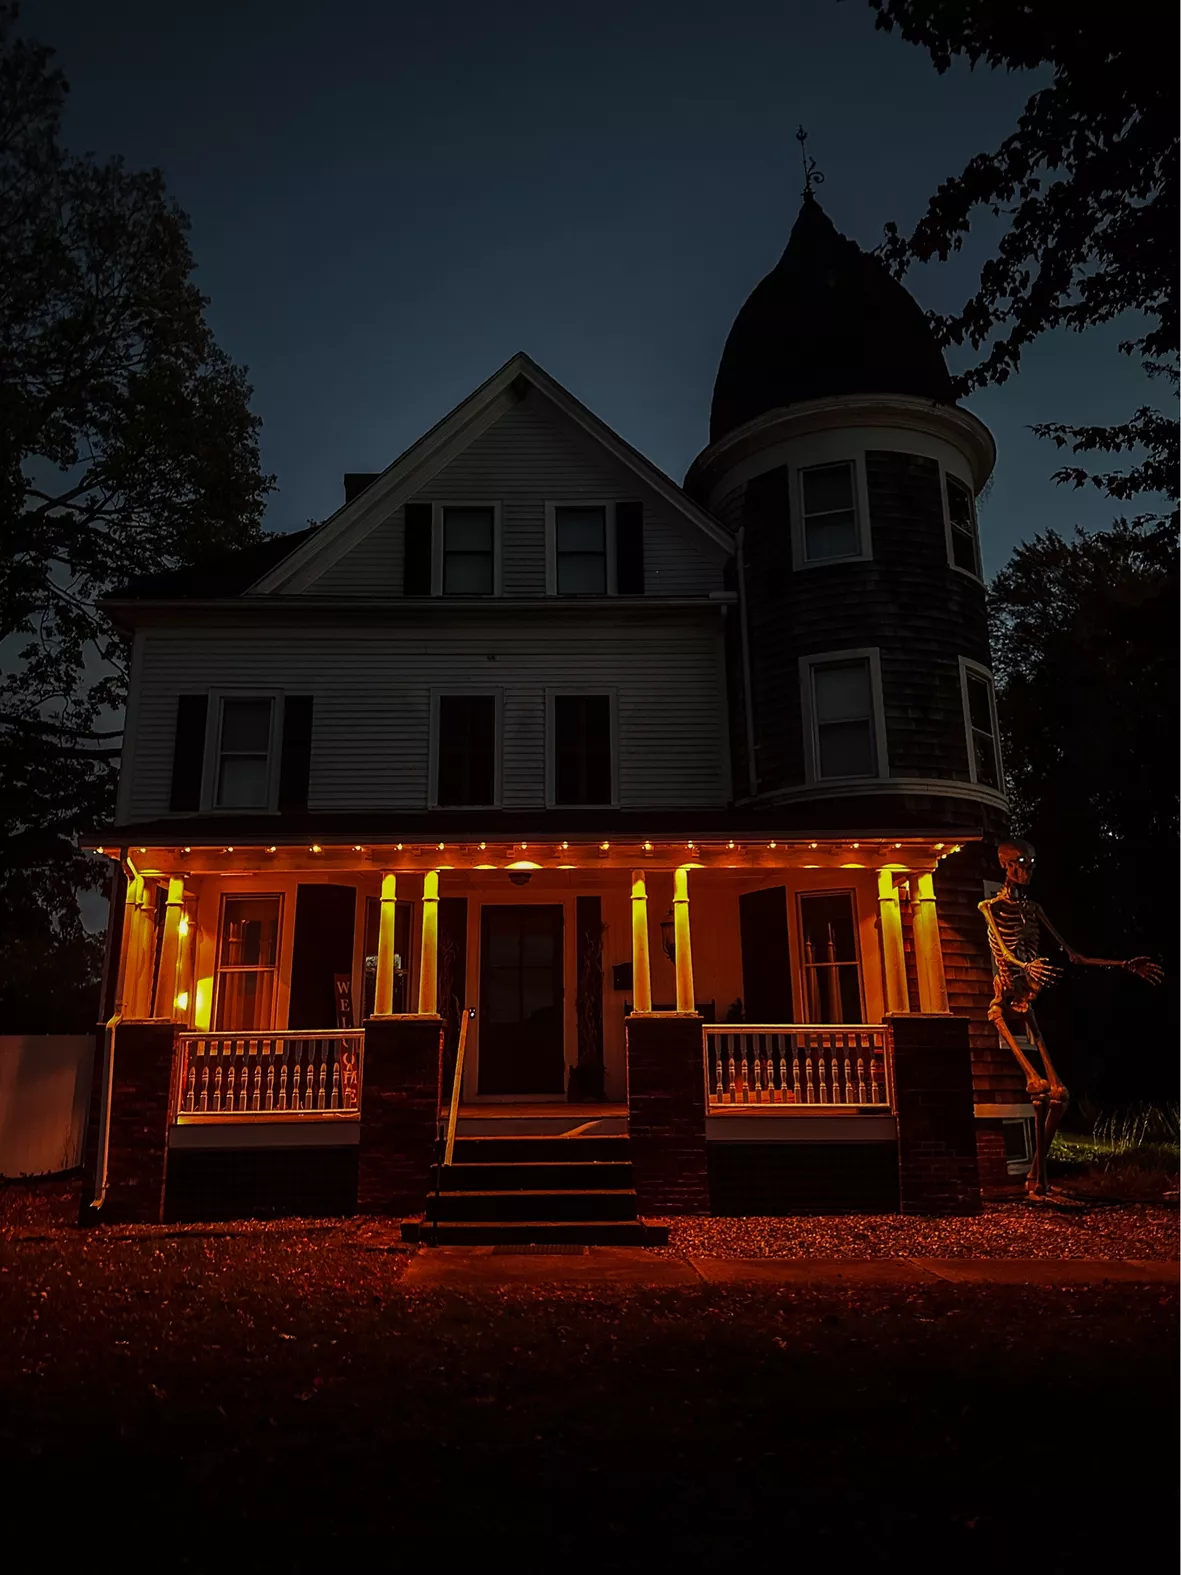 Govee unveils new outdoor lights in time for spooky season